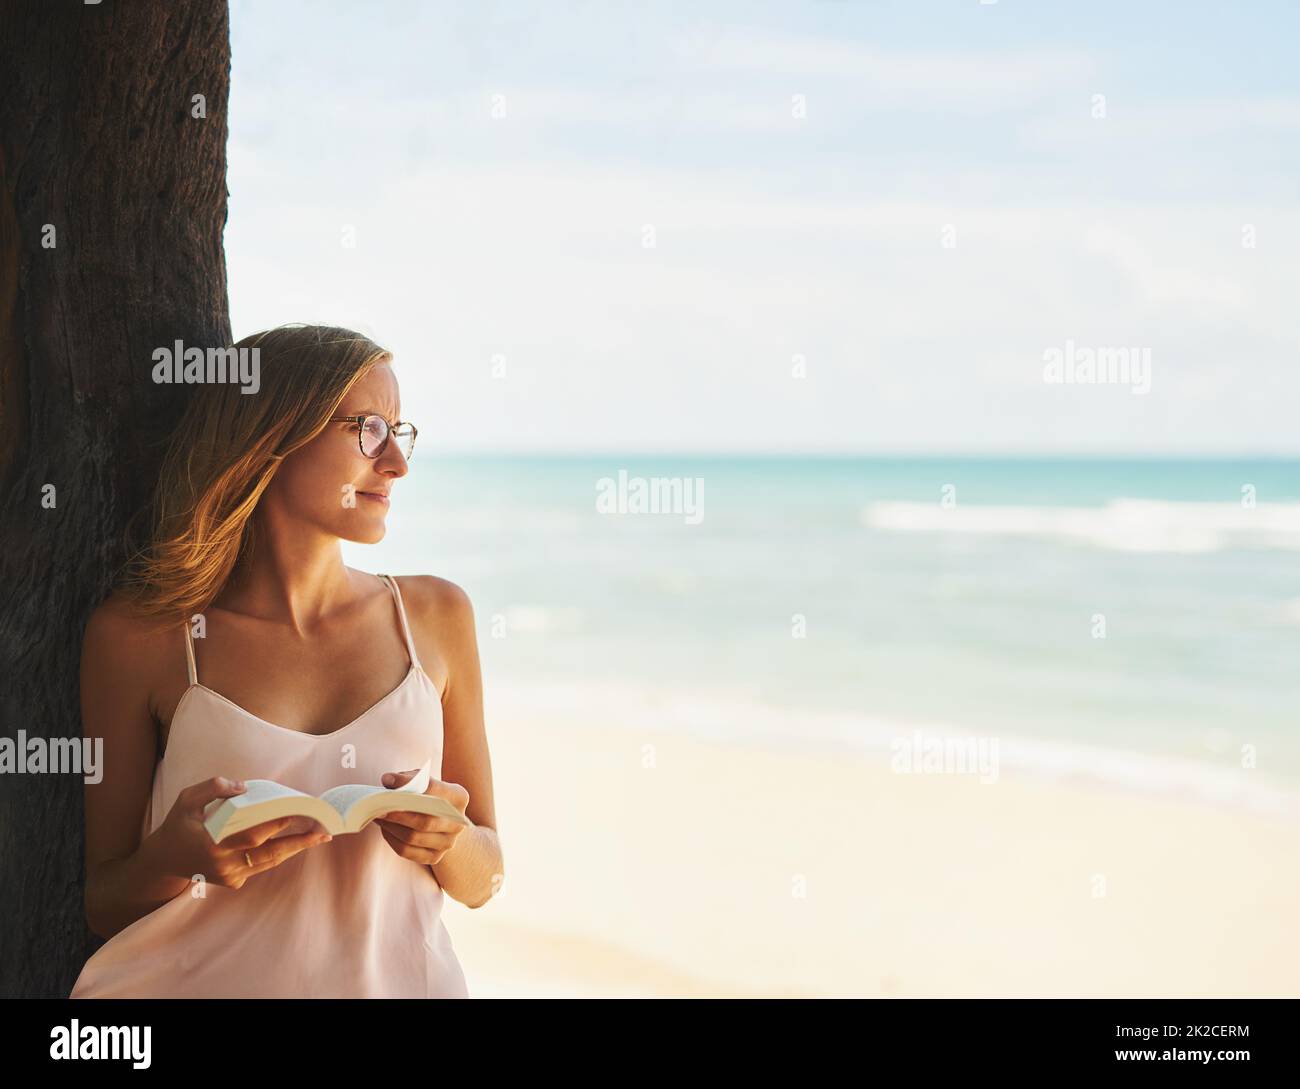 The beach is a place of serenity and quiet contemplation. Cropped shot of a young woman reading a book at the beach. Stock Photo